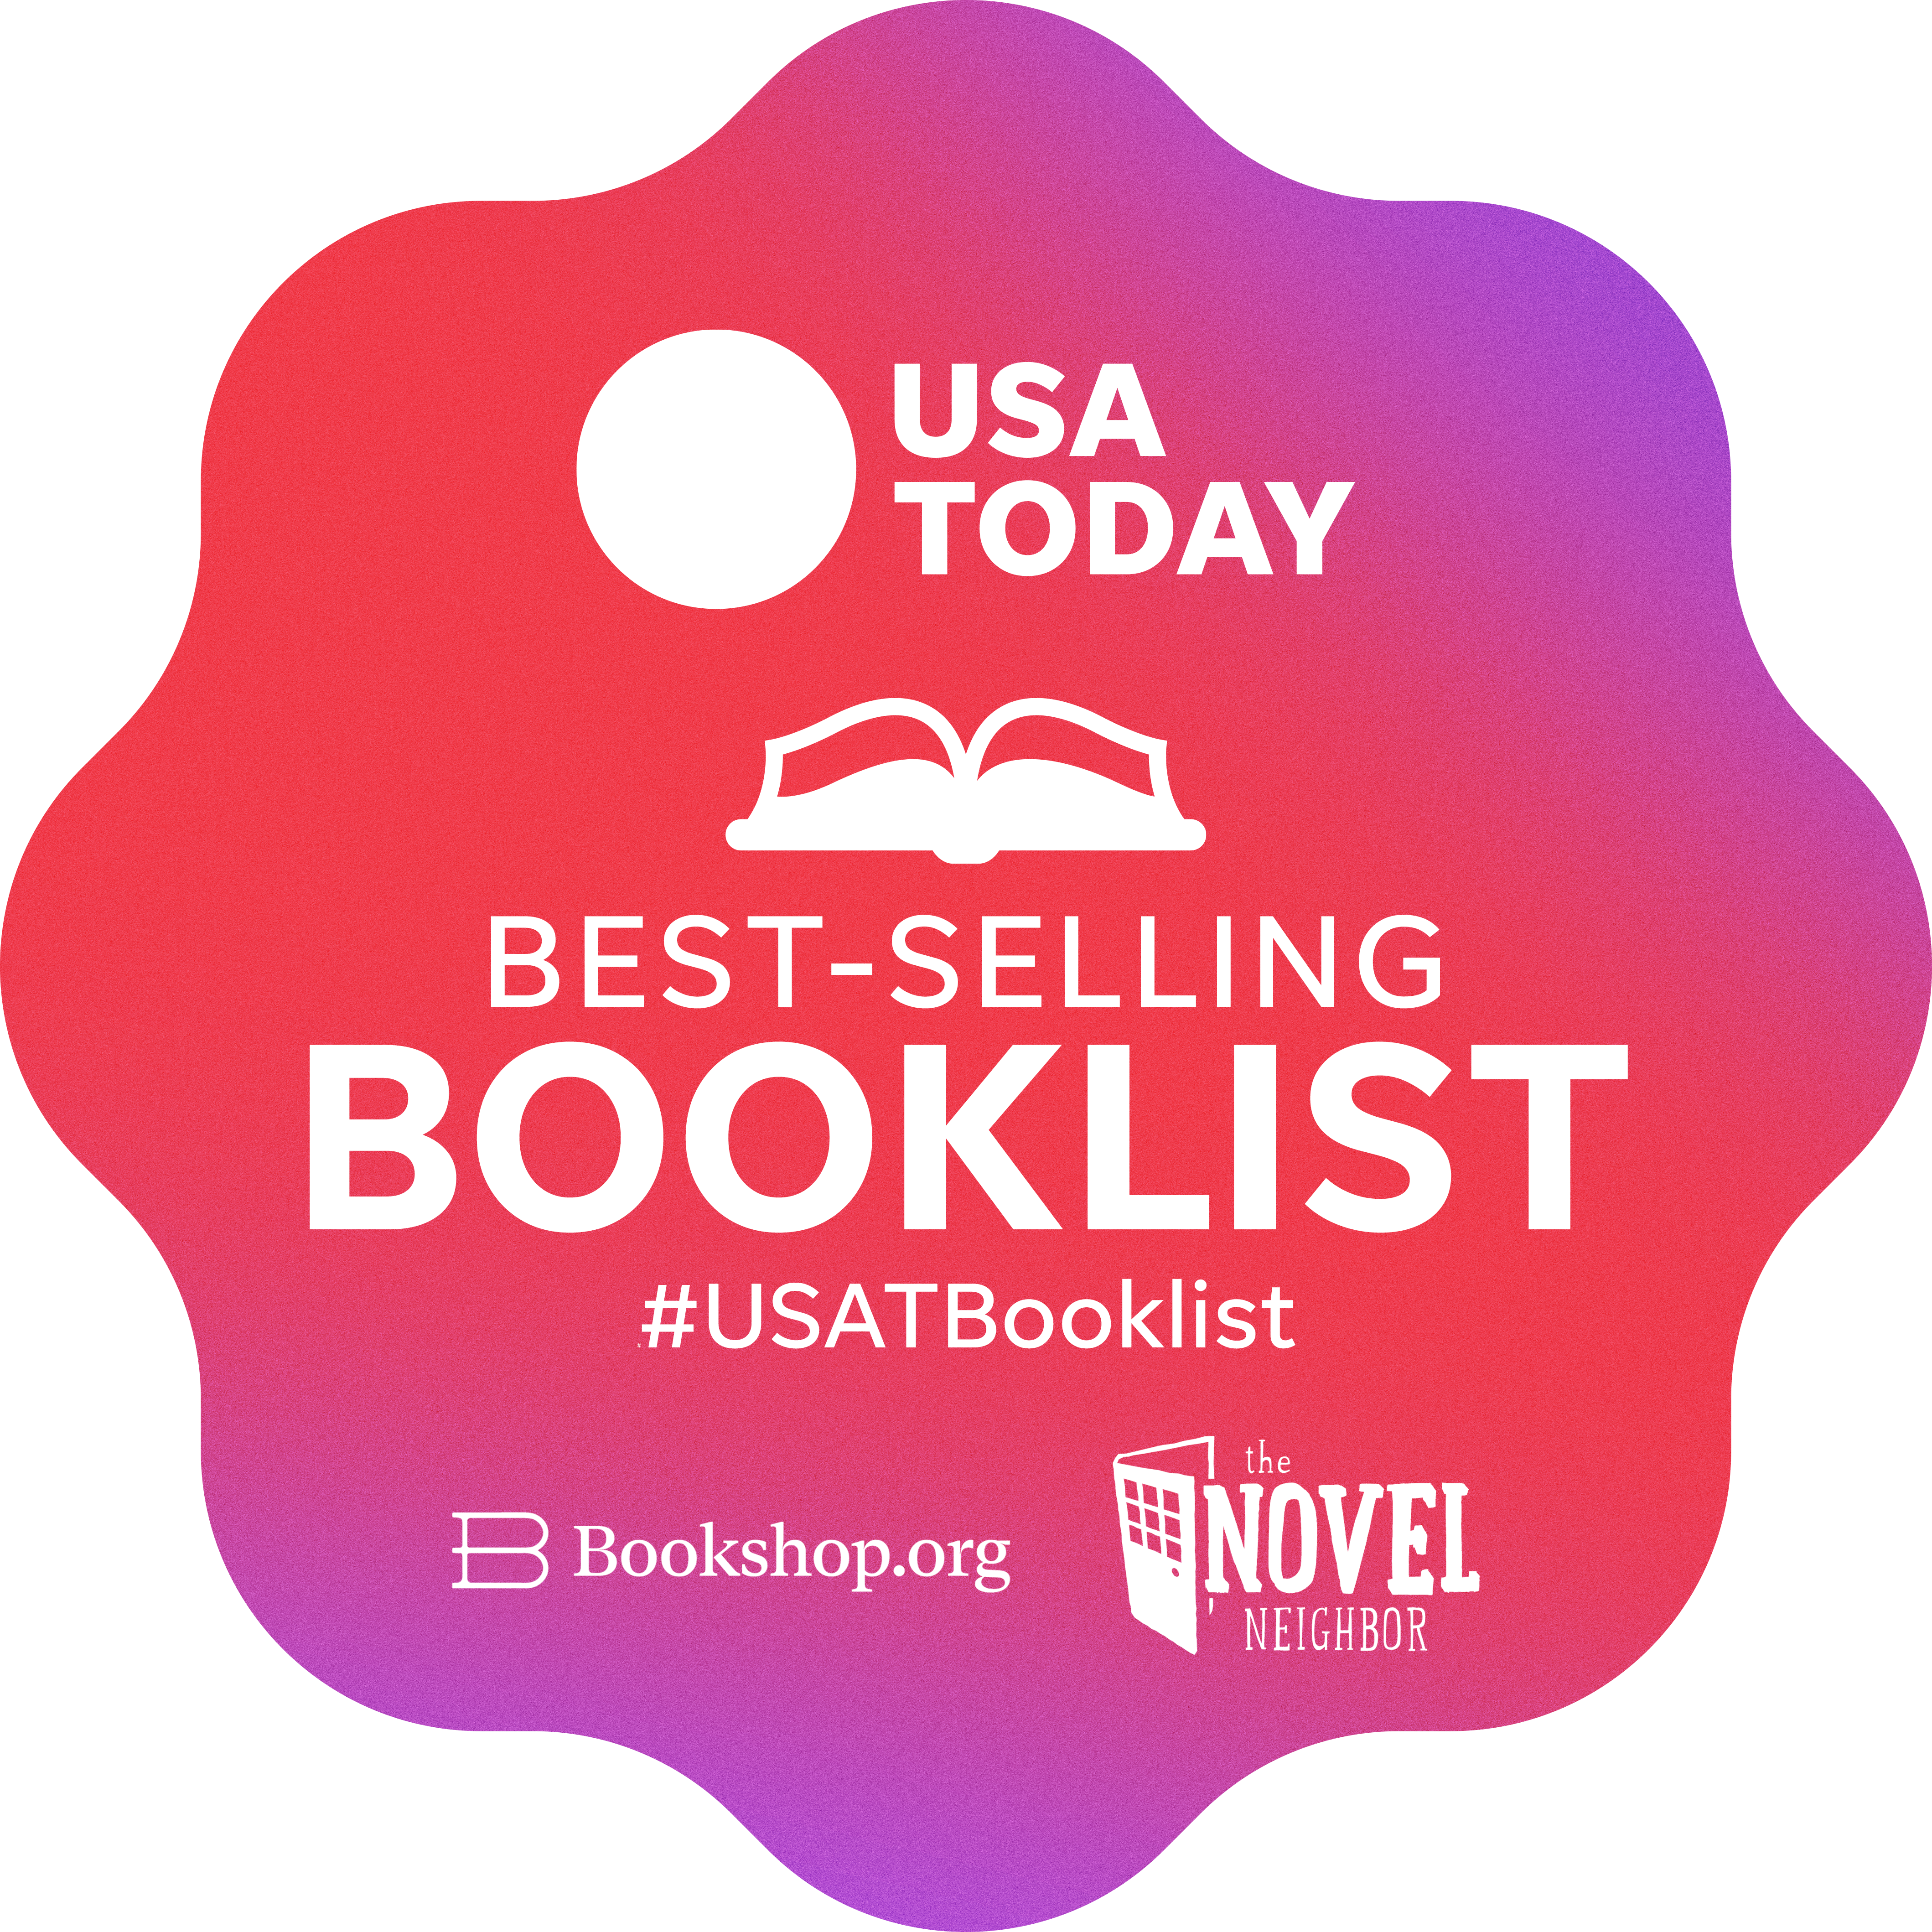 USA TODAY Best-selling Booklist Returns